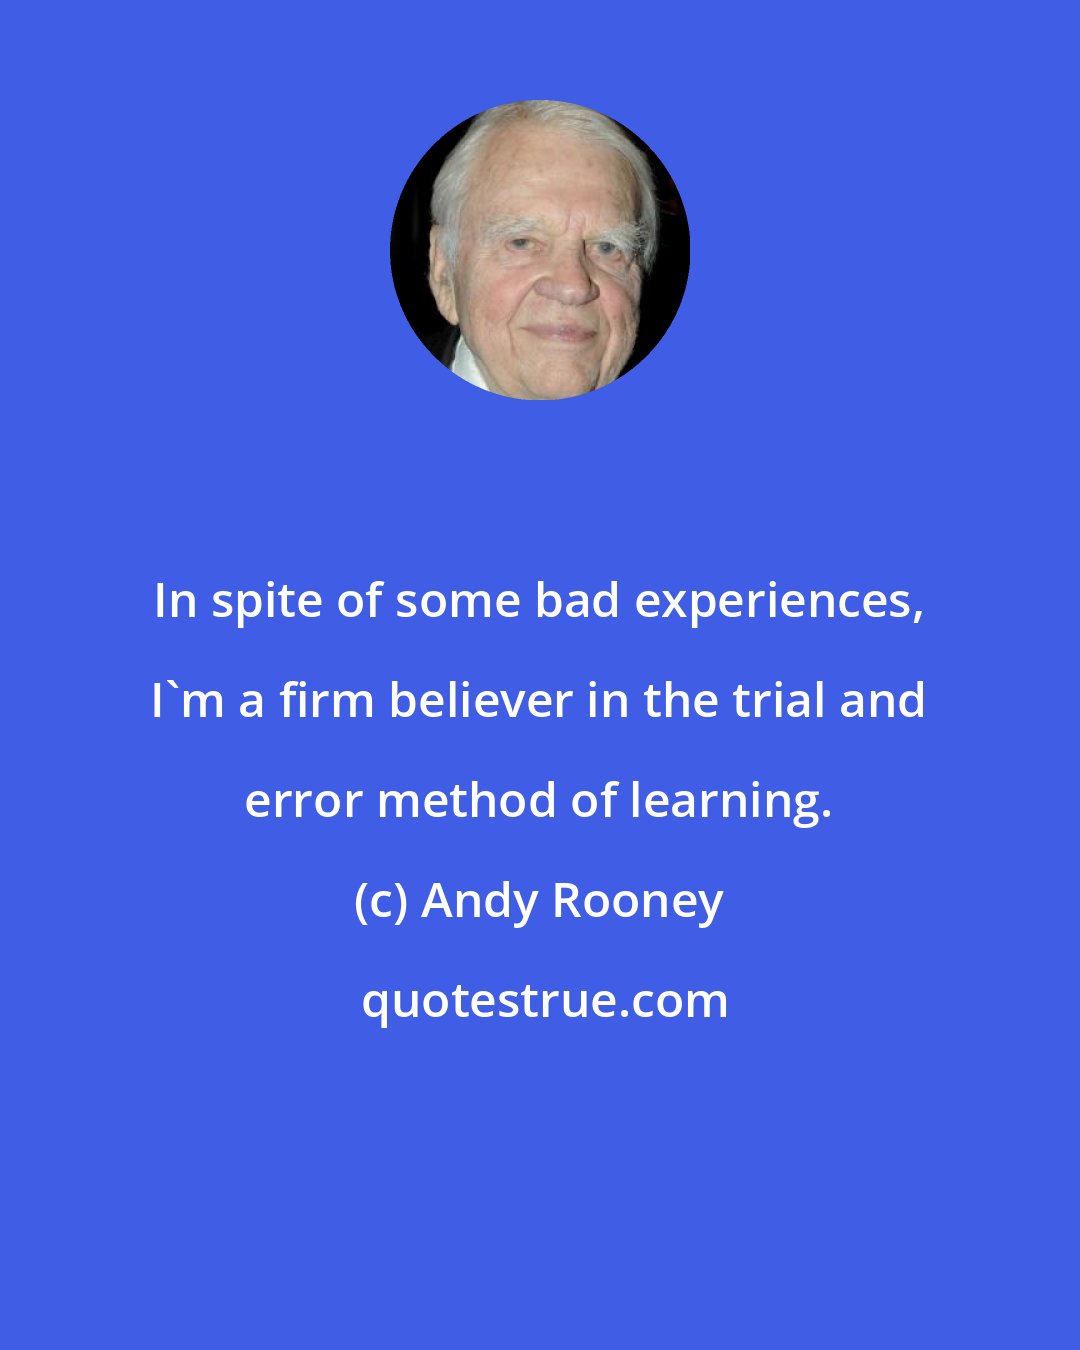 Andy Rooney: In spite of some bad experiences, I'm a firm believer in the trial and error method of learning.